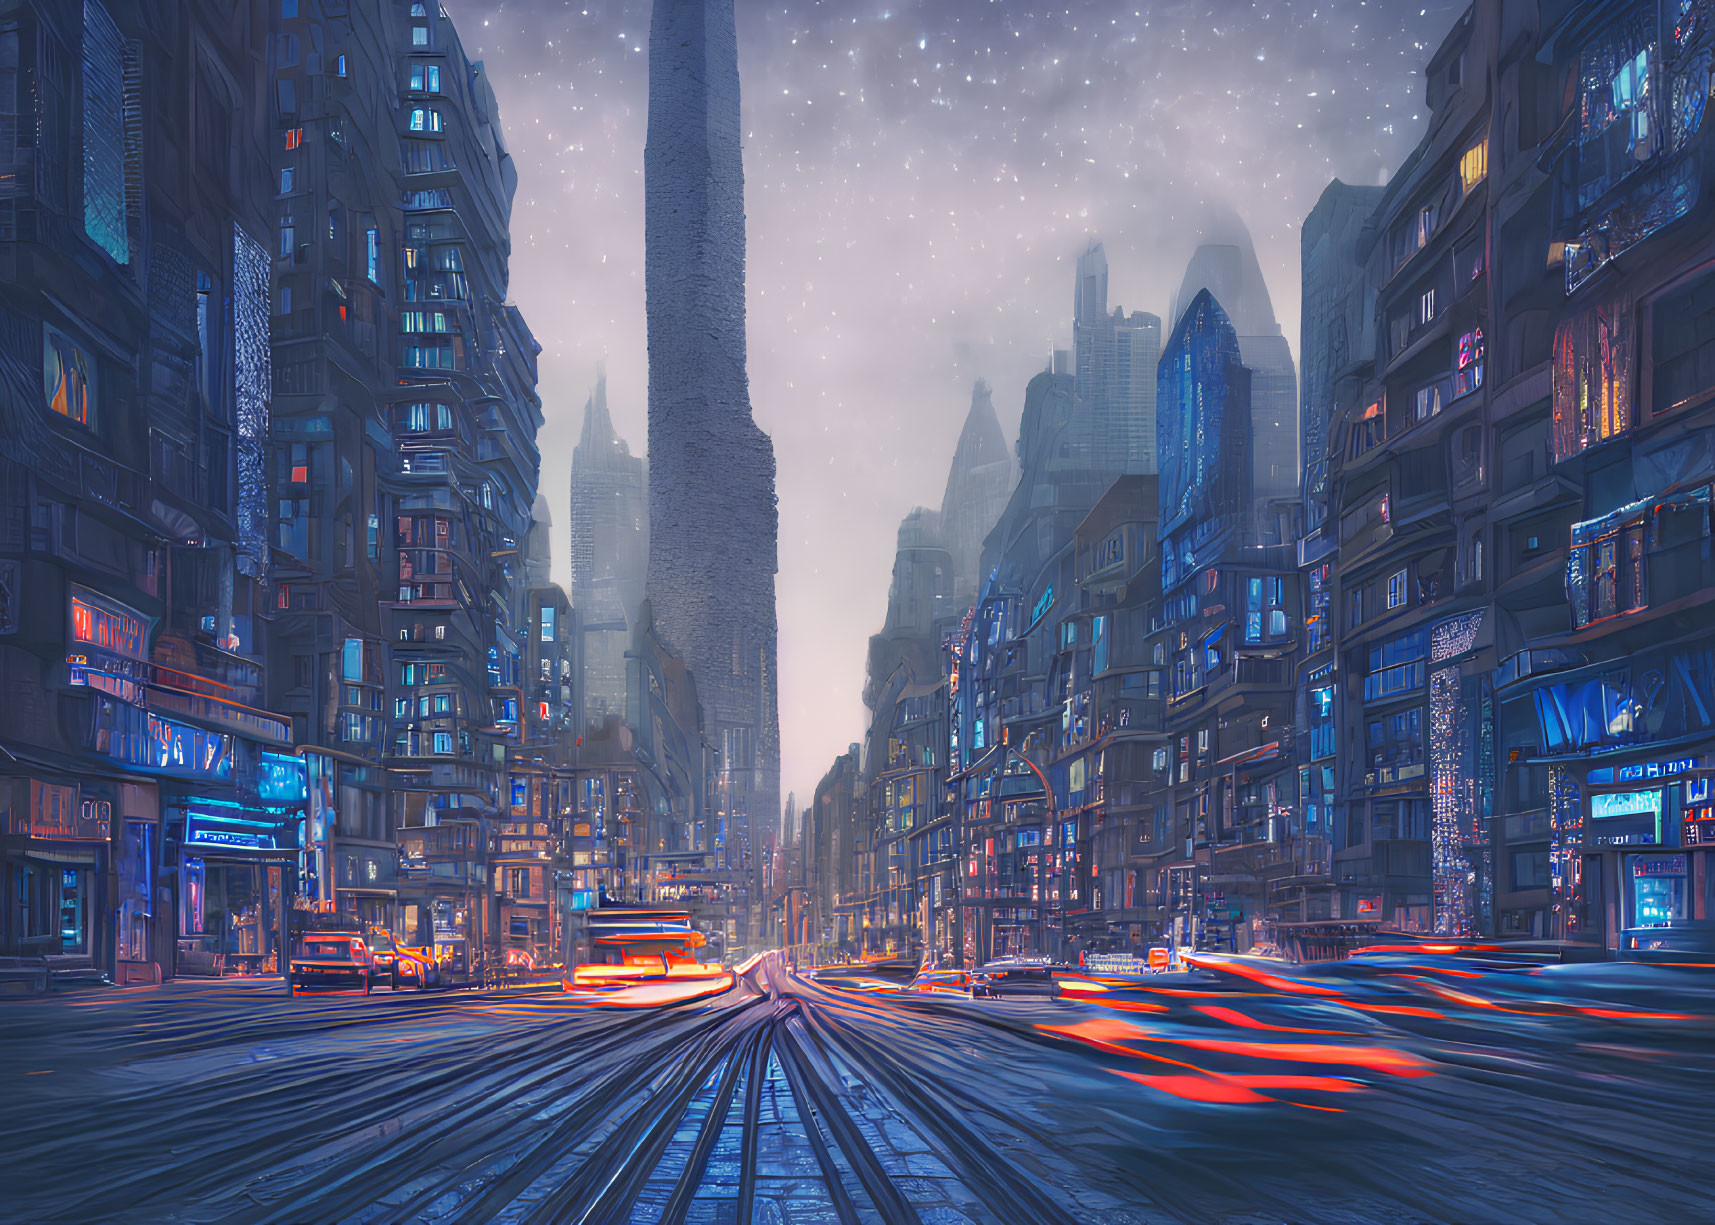 Futuristic twilight cityscape with skyscrapers, neon signs, and fast-moving vehicle lights.